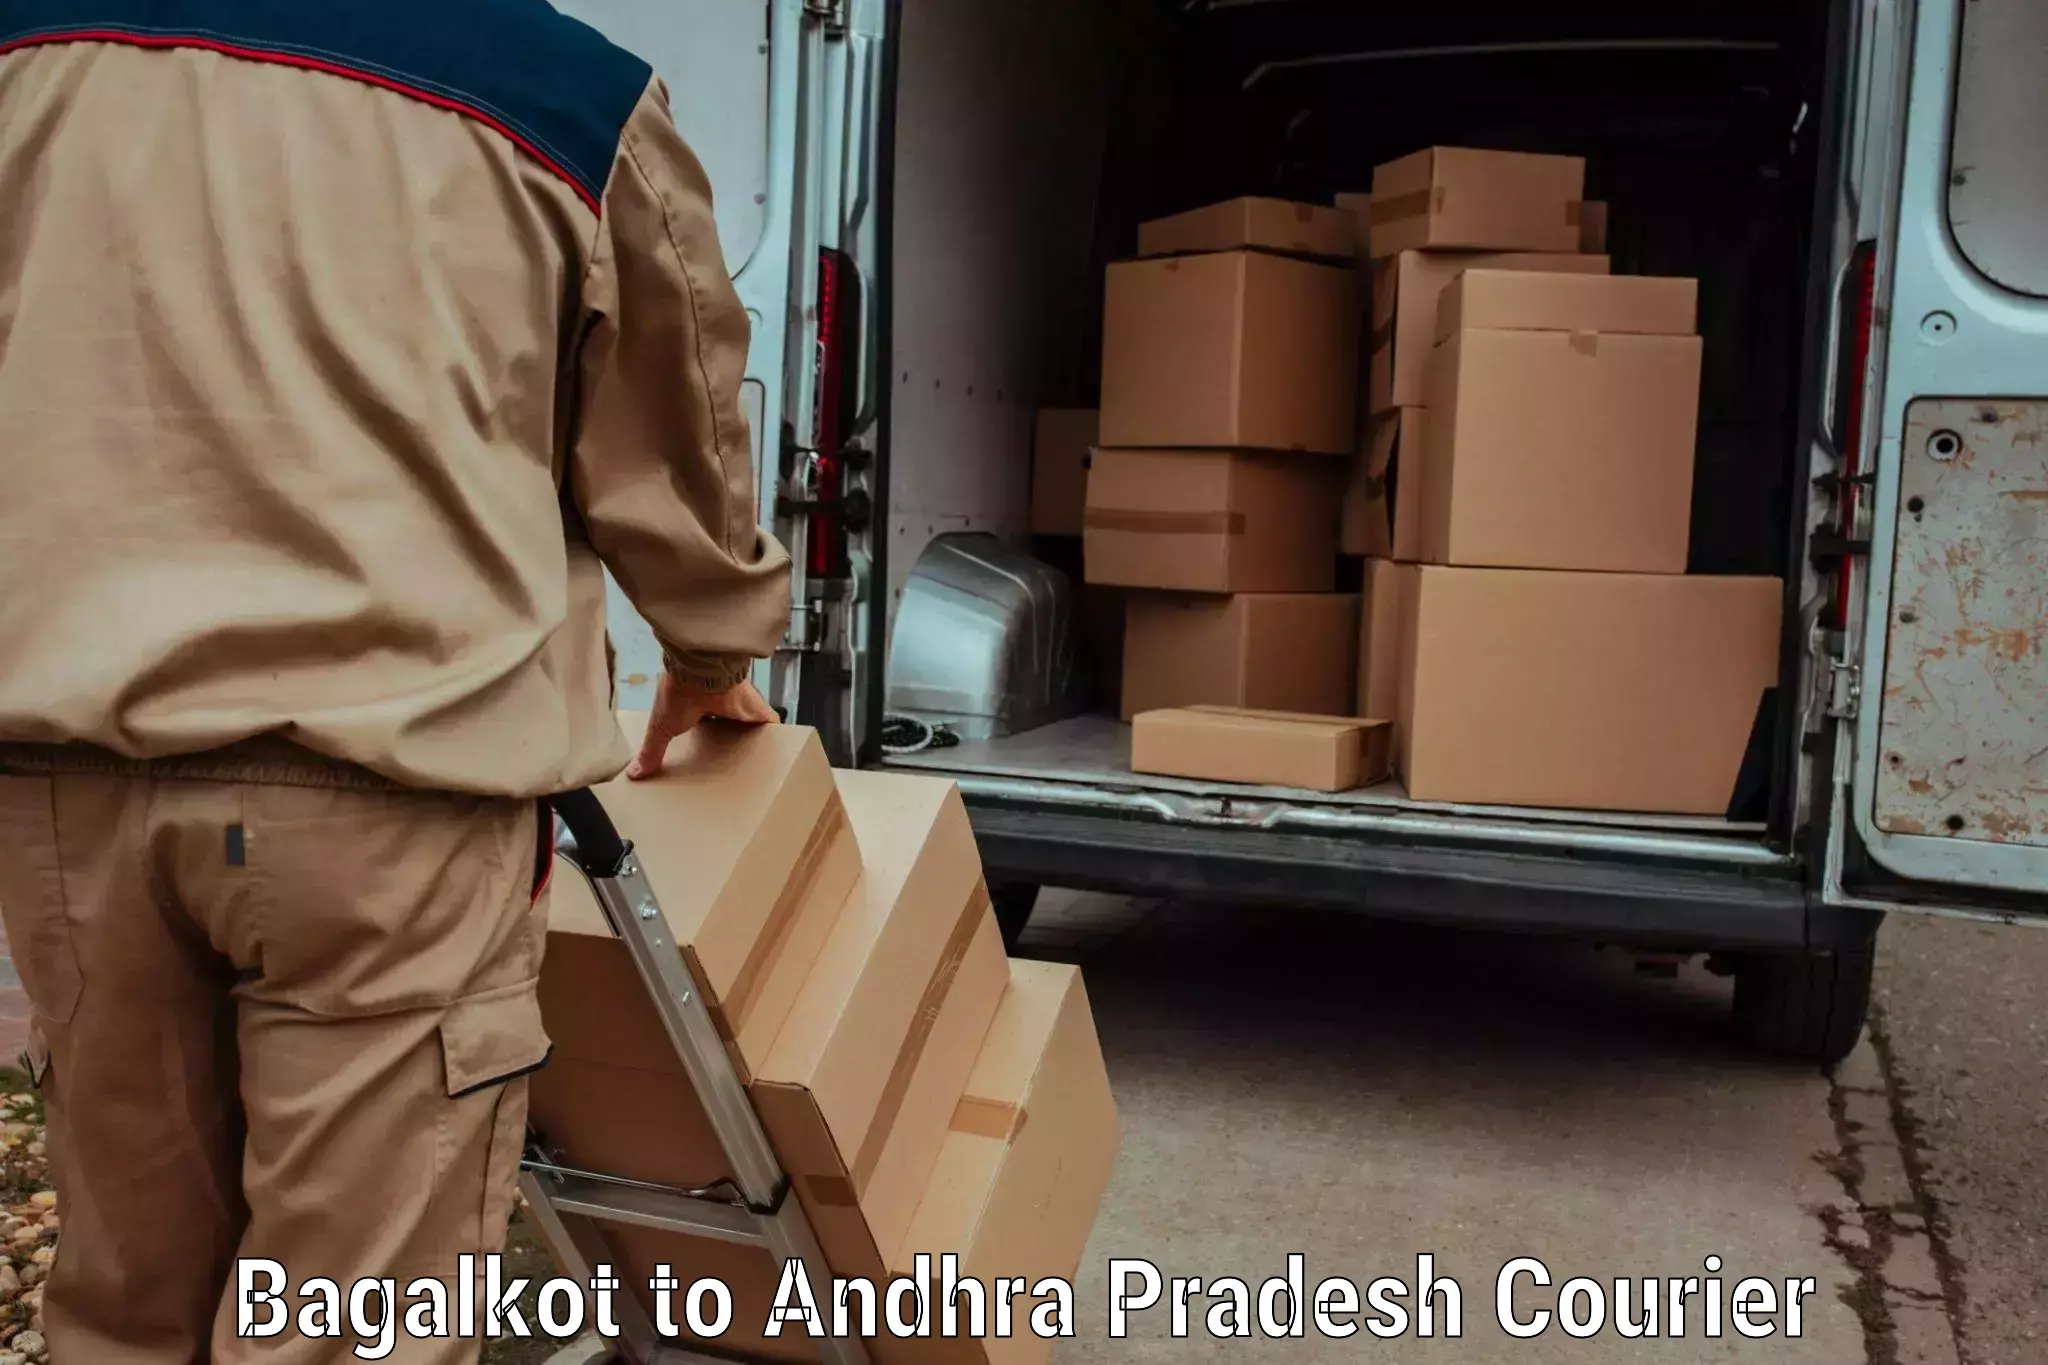 Next-day delivery options Bagalkot to Challapalli